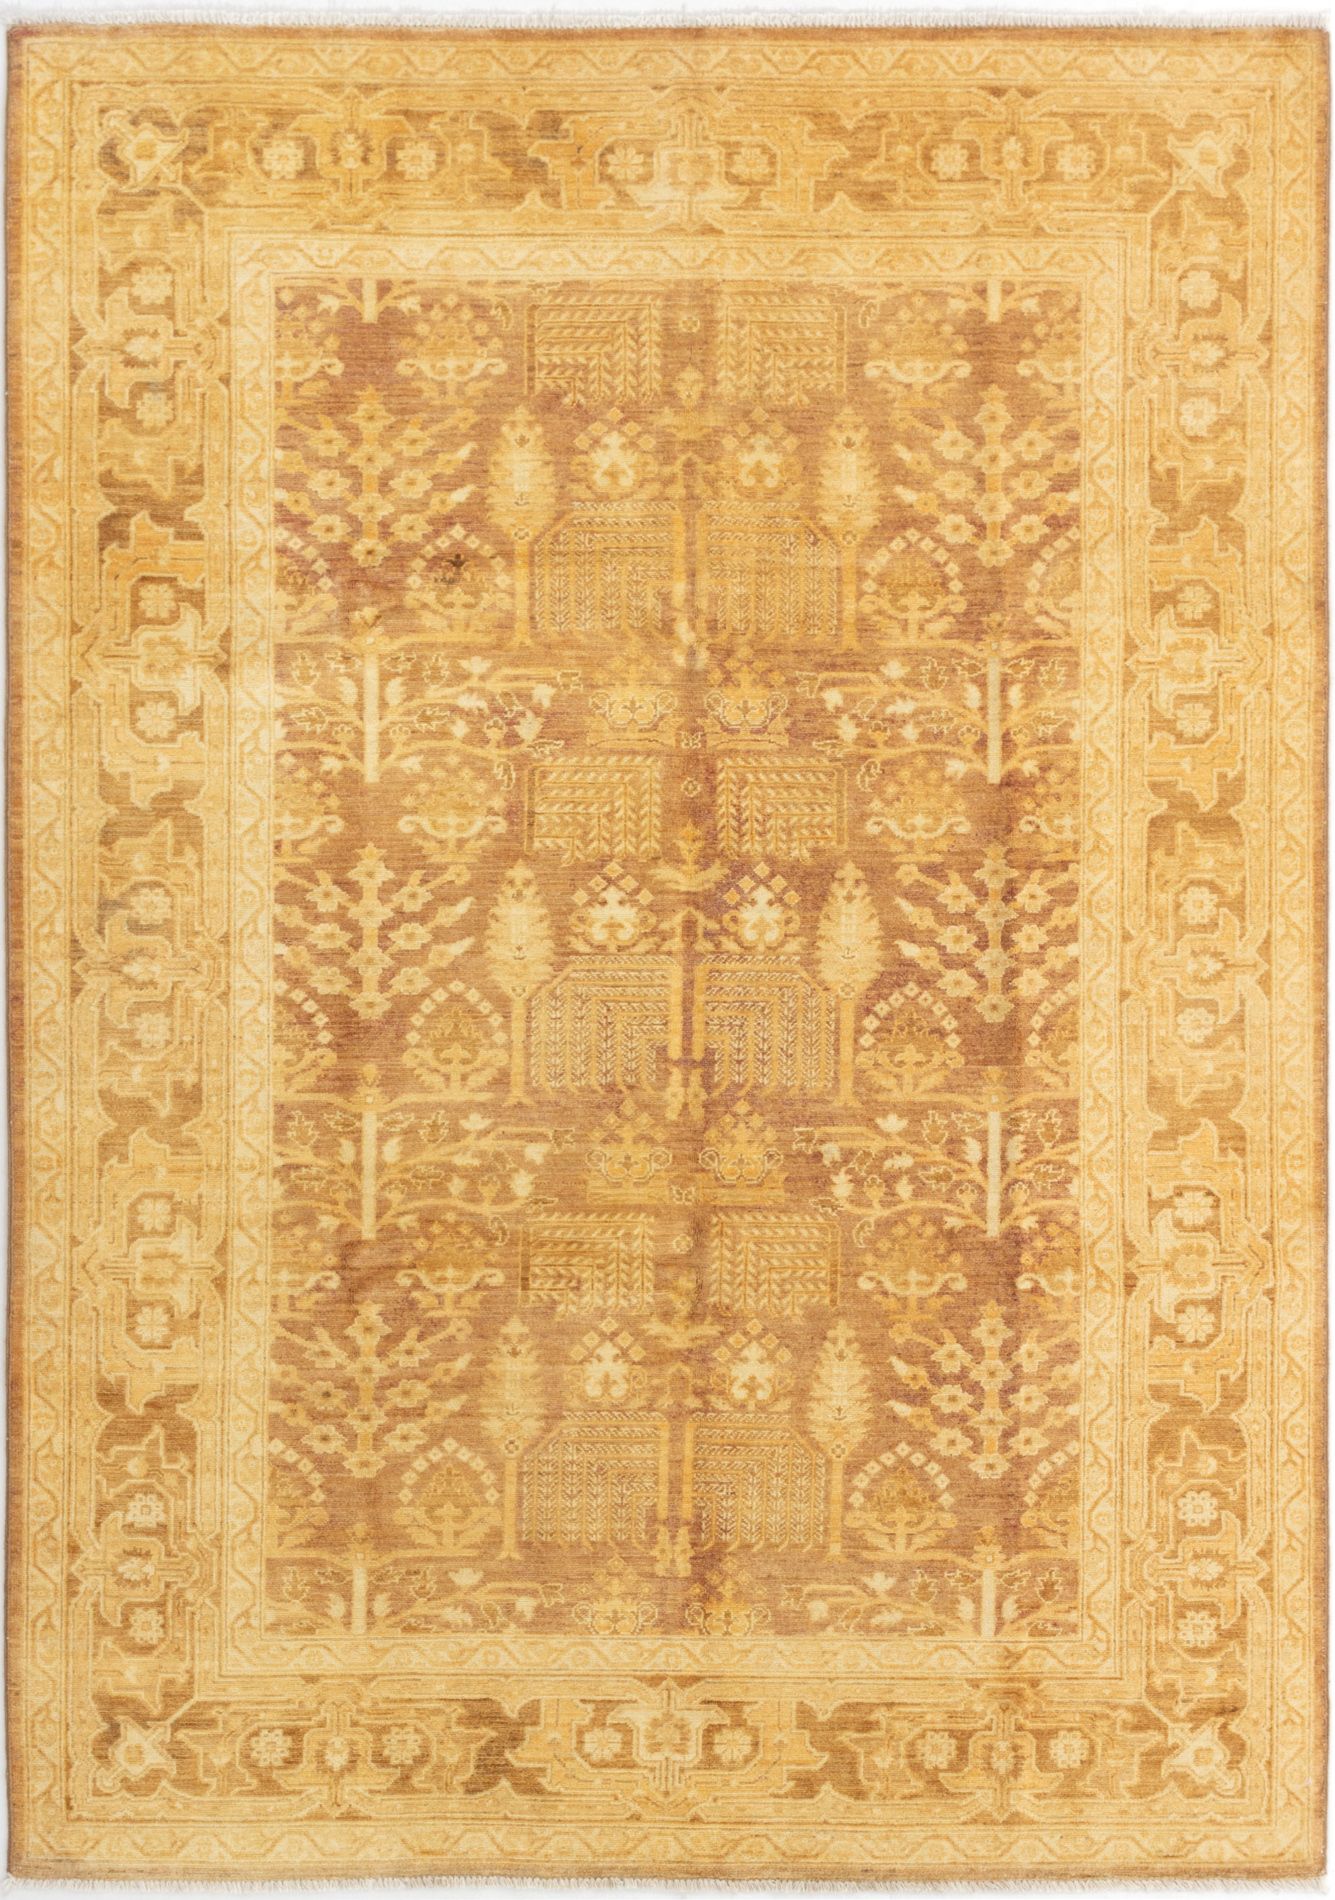 Hand-knotted Peshawar Finest Brown Wool Rug 6'3" x 8'10" Size: 6'3" x 8'10"  